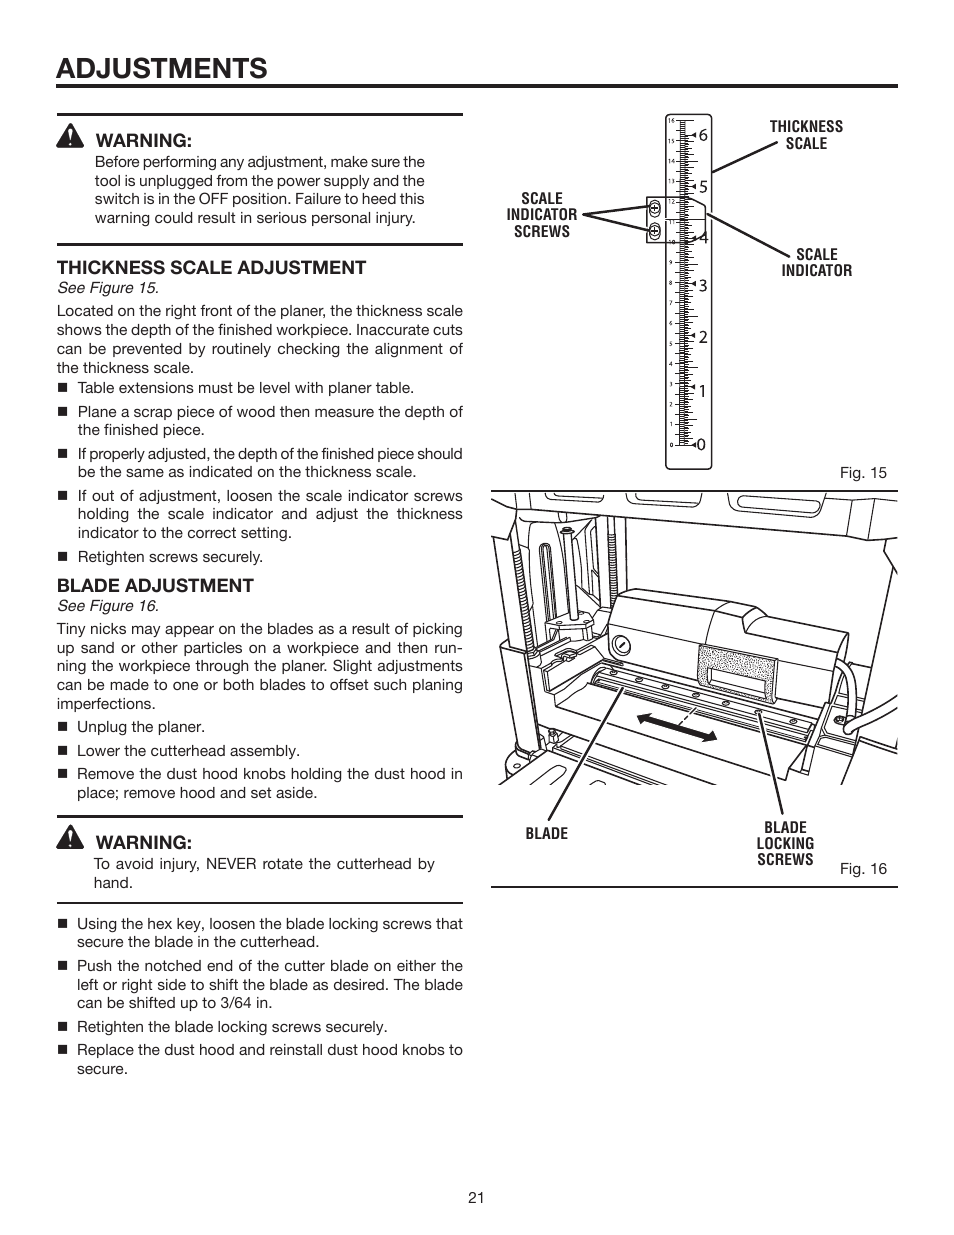 Adjustments | RIDGID 13 in. THICKNESS PLANER R4330 User Manual | Page